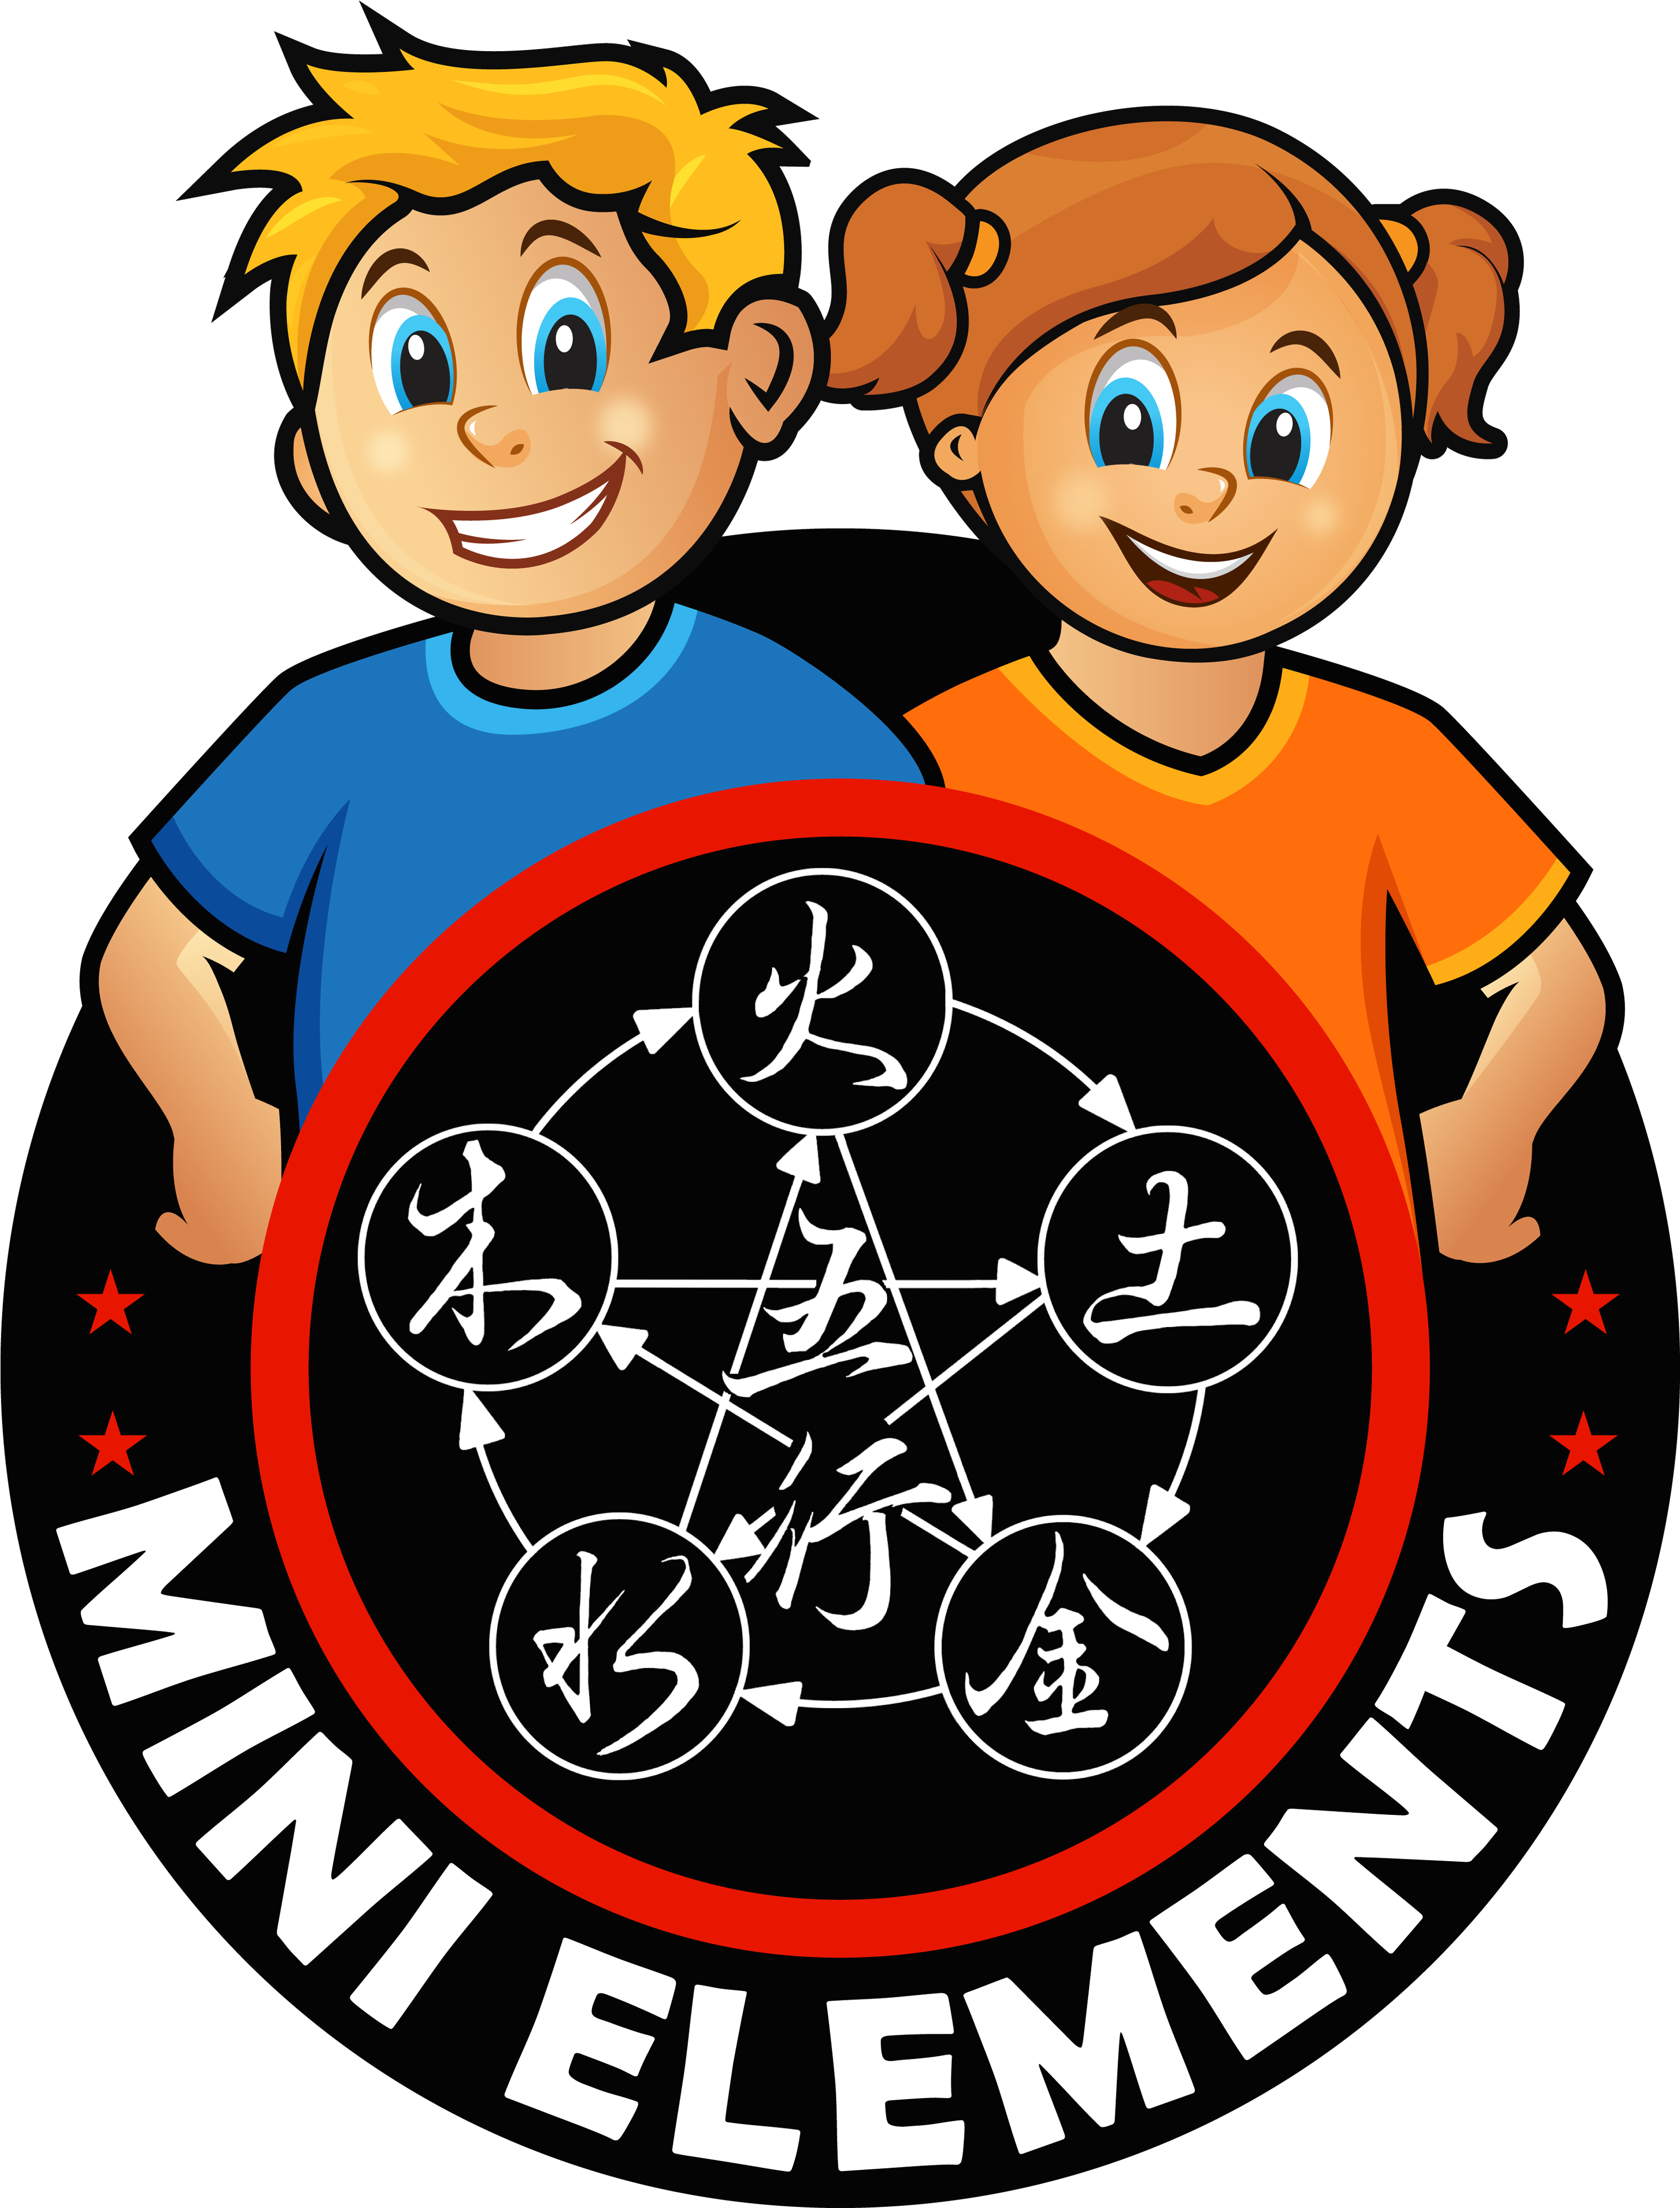 Mini Elements Is The Class Aimed At Our 3 To 5 Year - Mini Elements Is The Class Aimed At Our 3 To 5 Year (3226x4240)